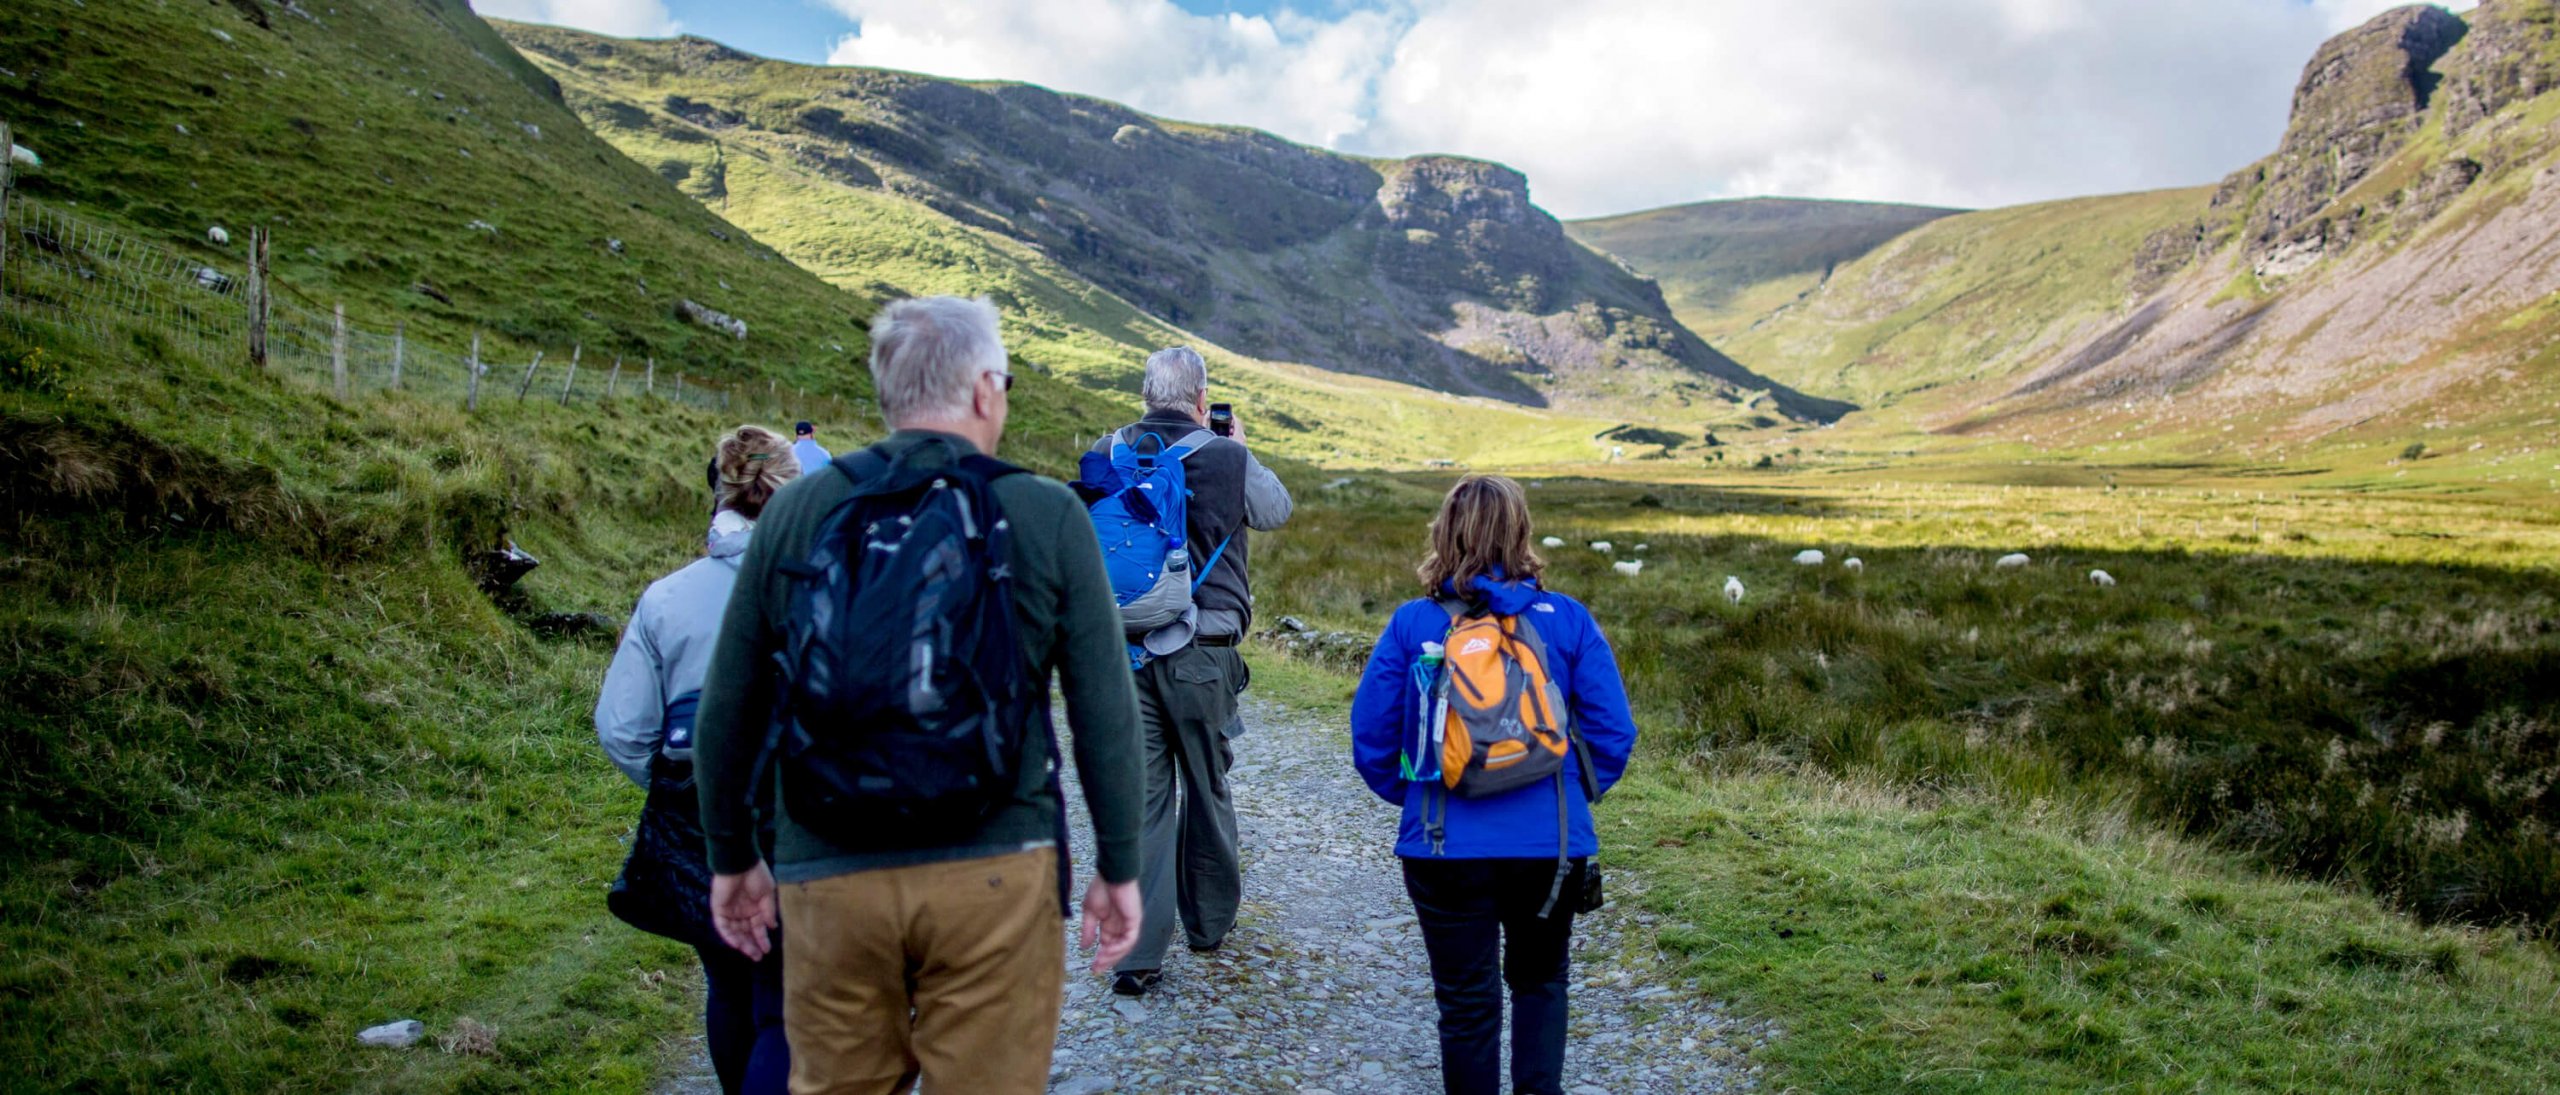 Hiking group enjoying their Ireland tour in a green valley in Kerry